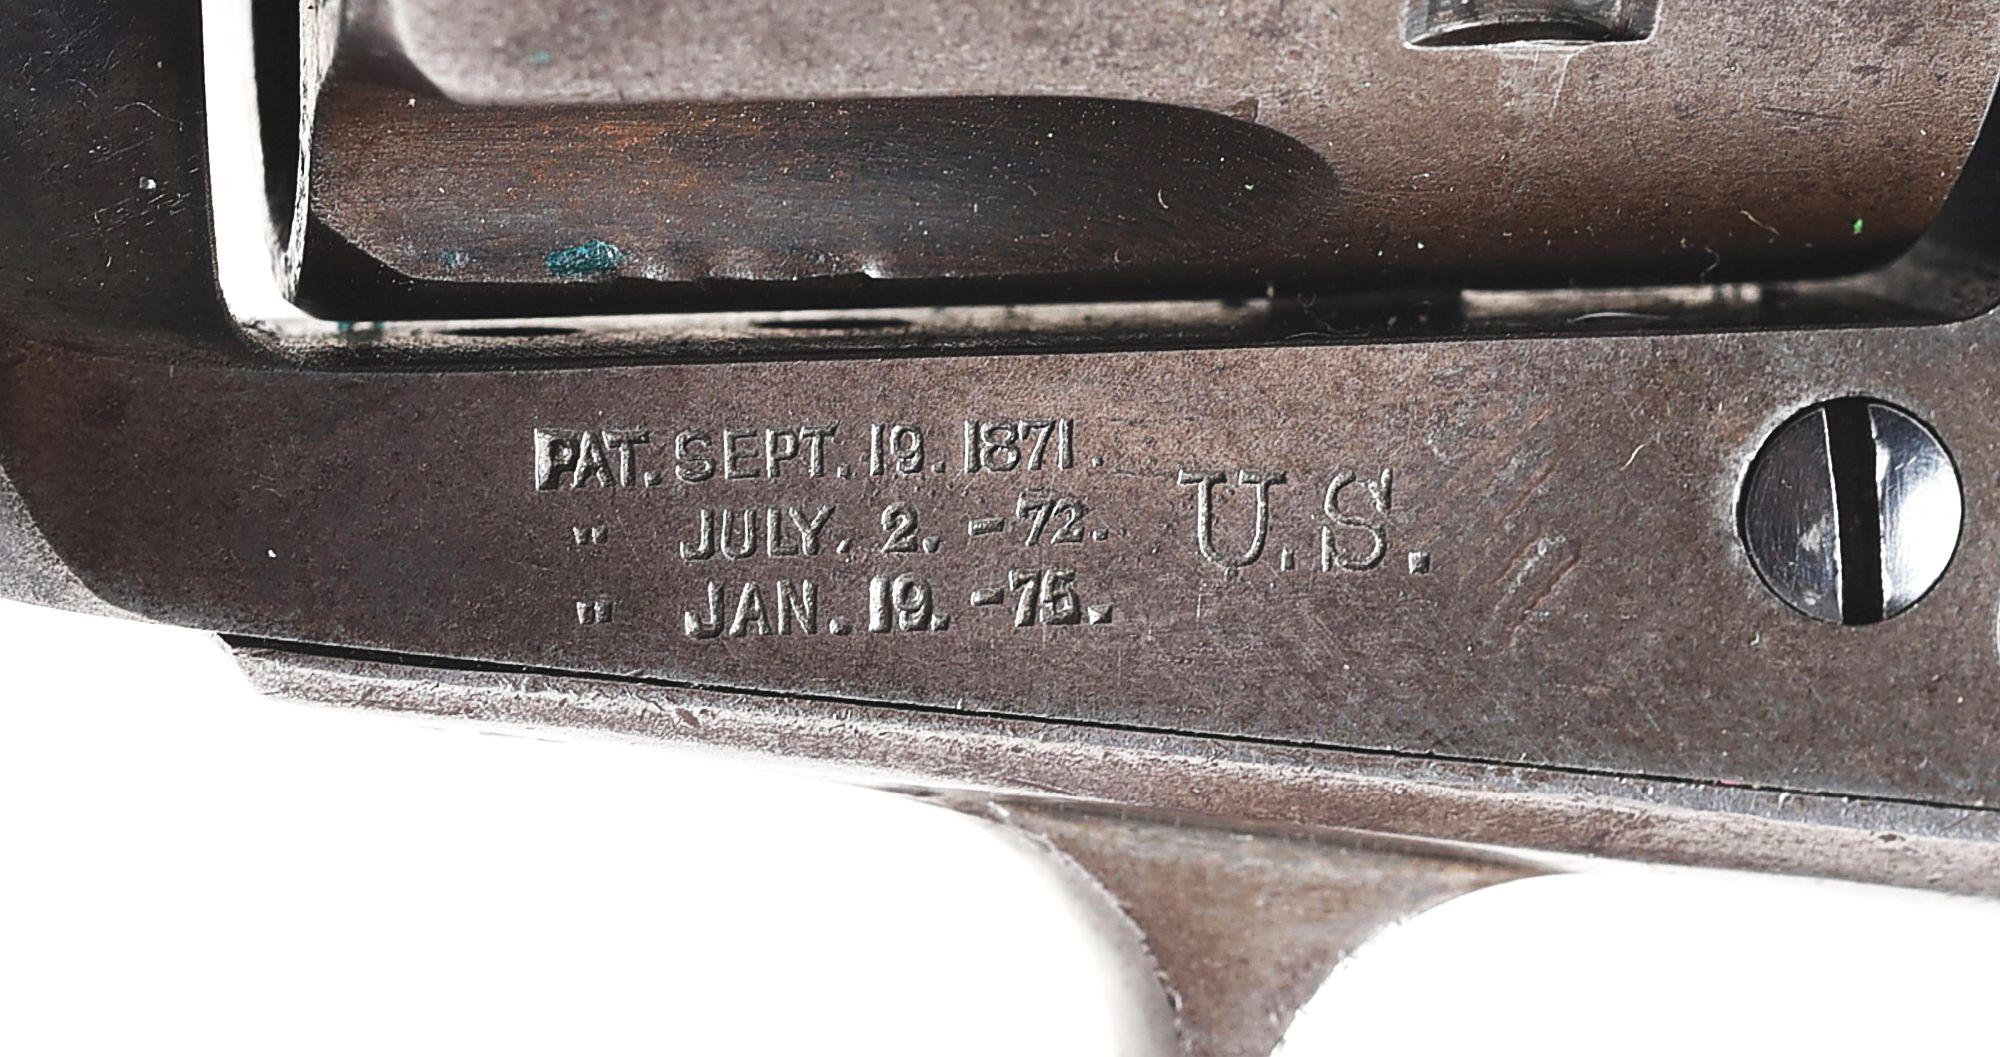 (A) DFC INSPECTED COLT SINGLE ARMY CAVALRY REVOLVER.